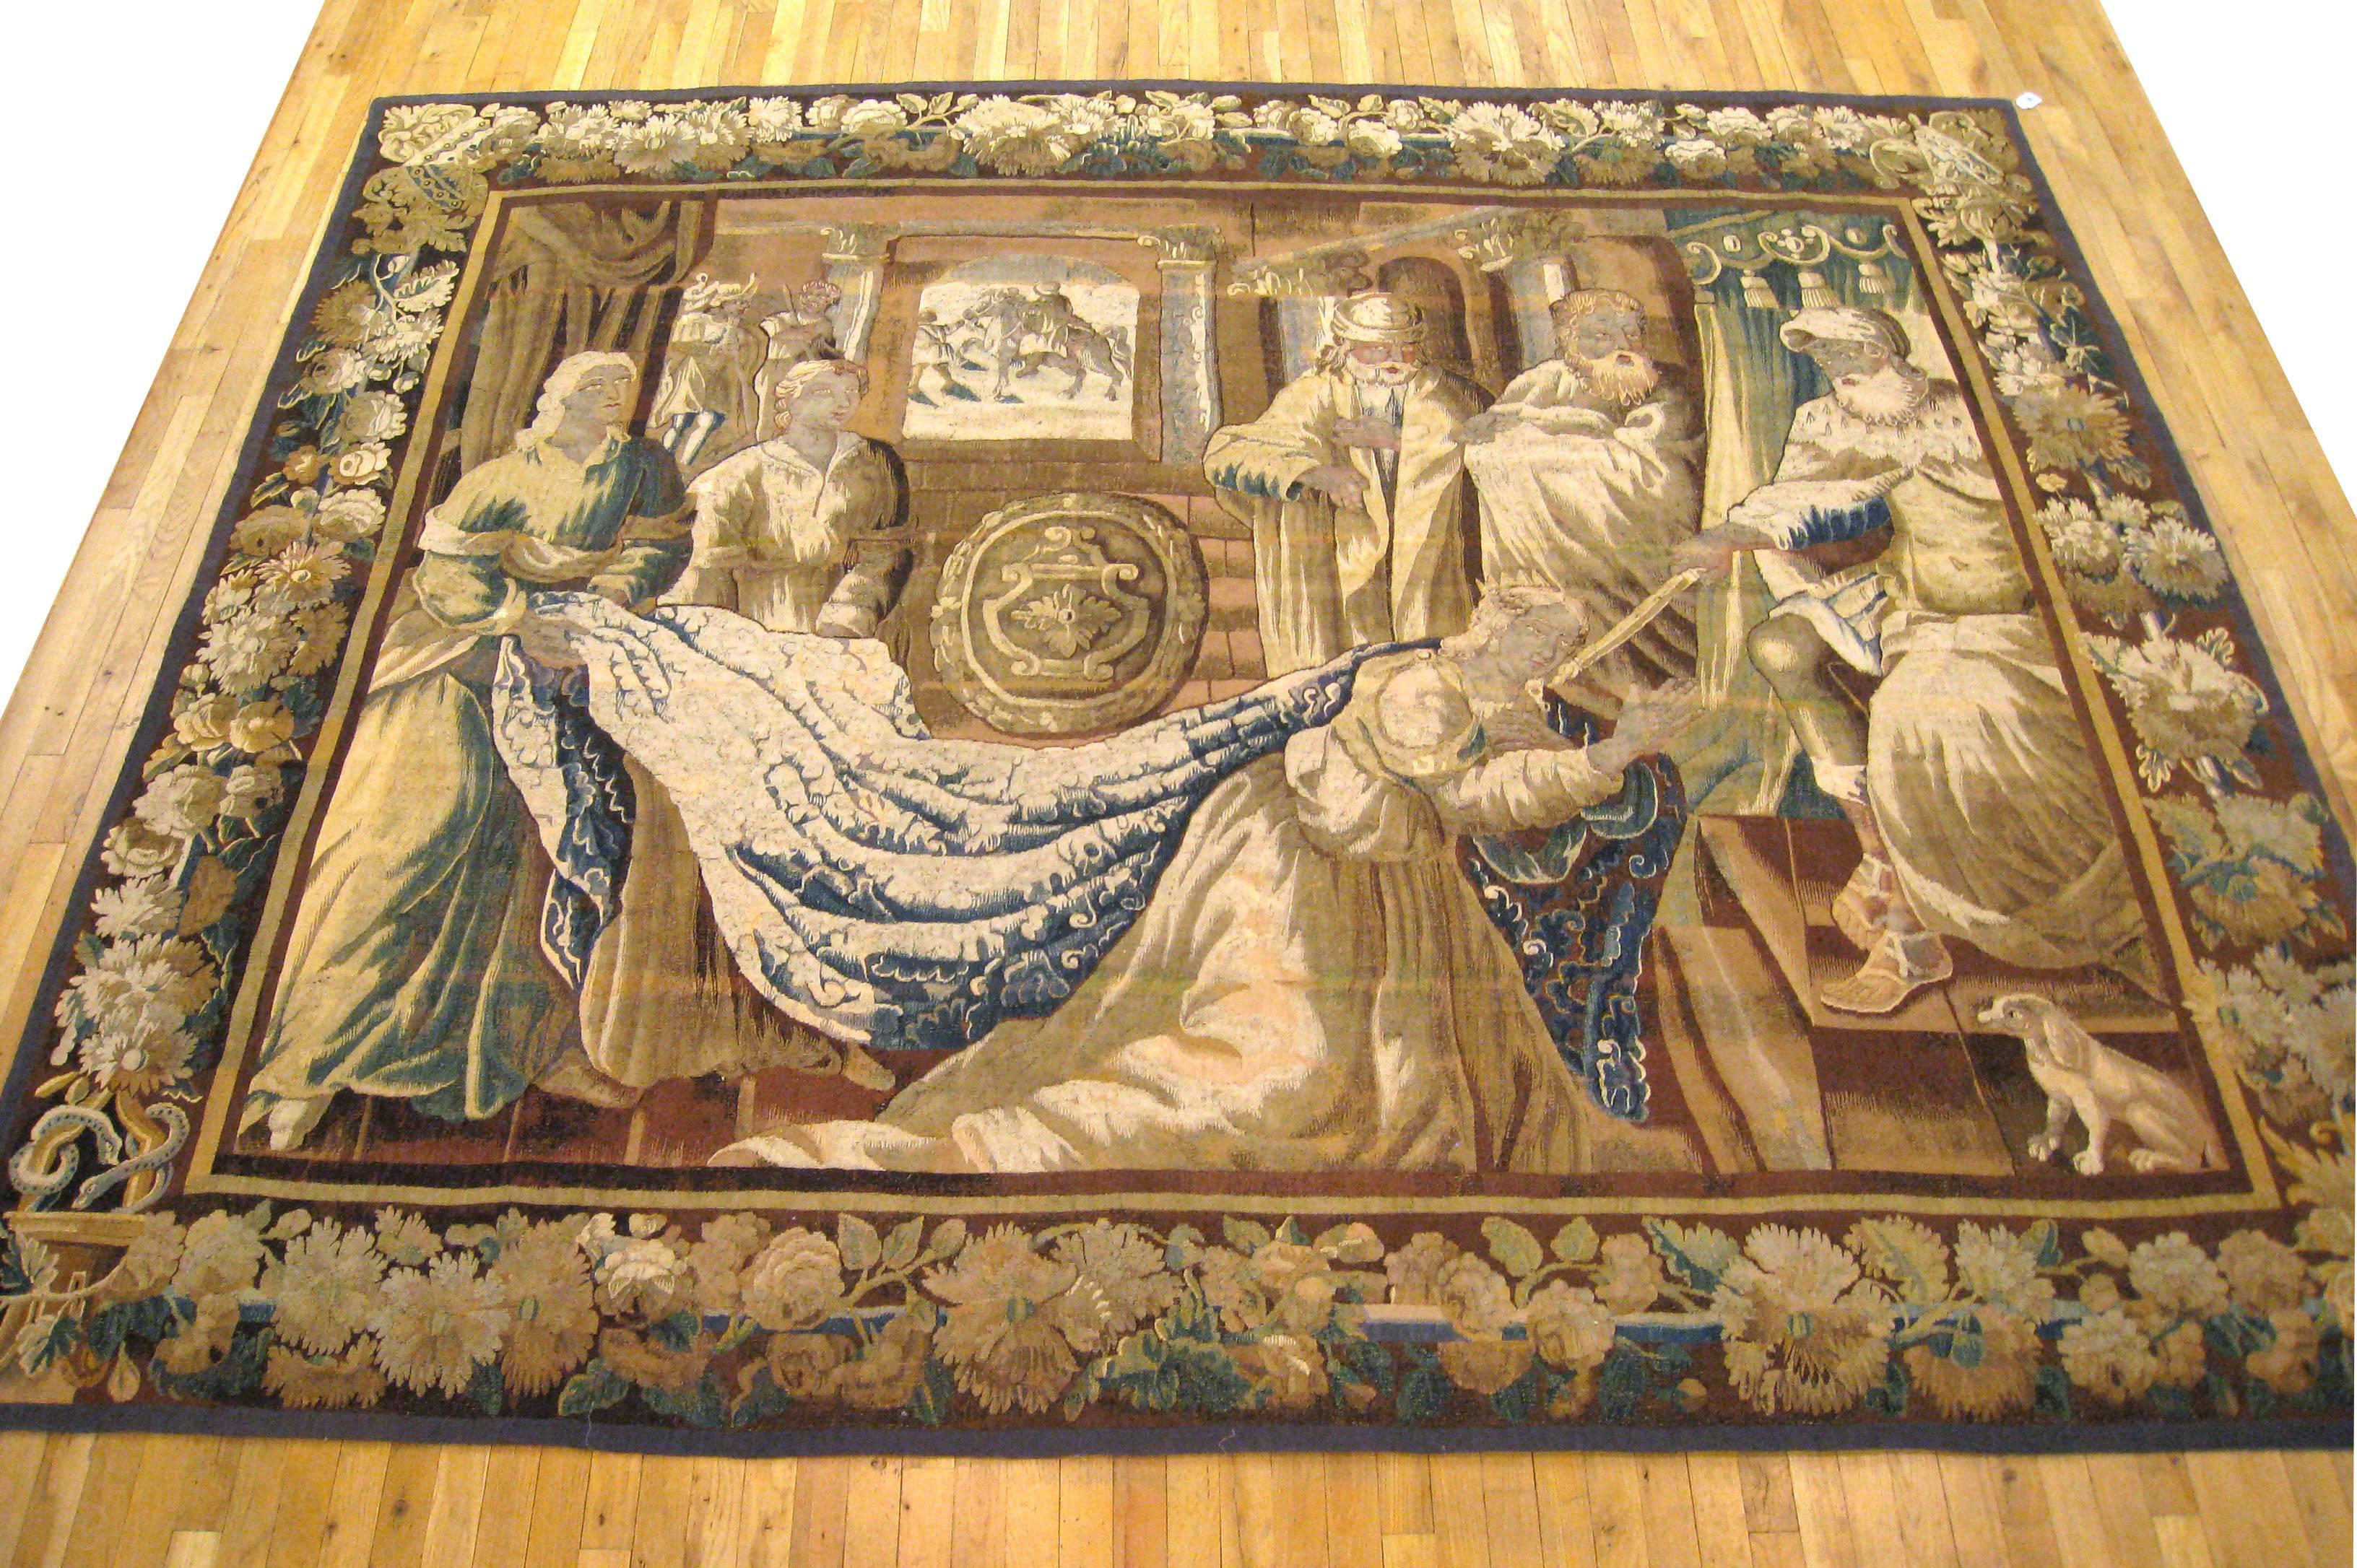 An antique 18th century Flemish Biblical tapestry, size 8'3 H x 10'1 W. 

This period European tapestry depicts a climactic moment from the Biblical account of the Purim story, with Queen Esther daring to approach the ruler of the vast Persian